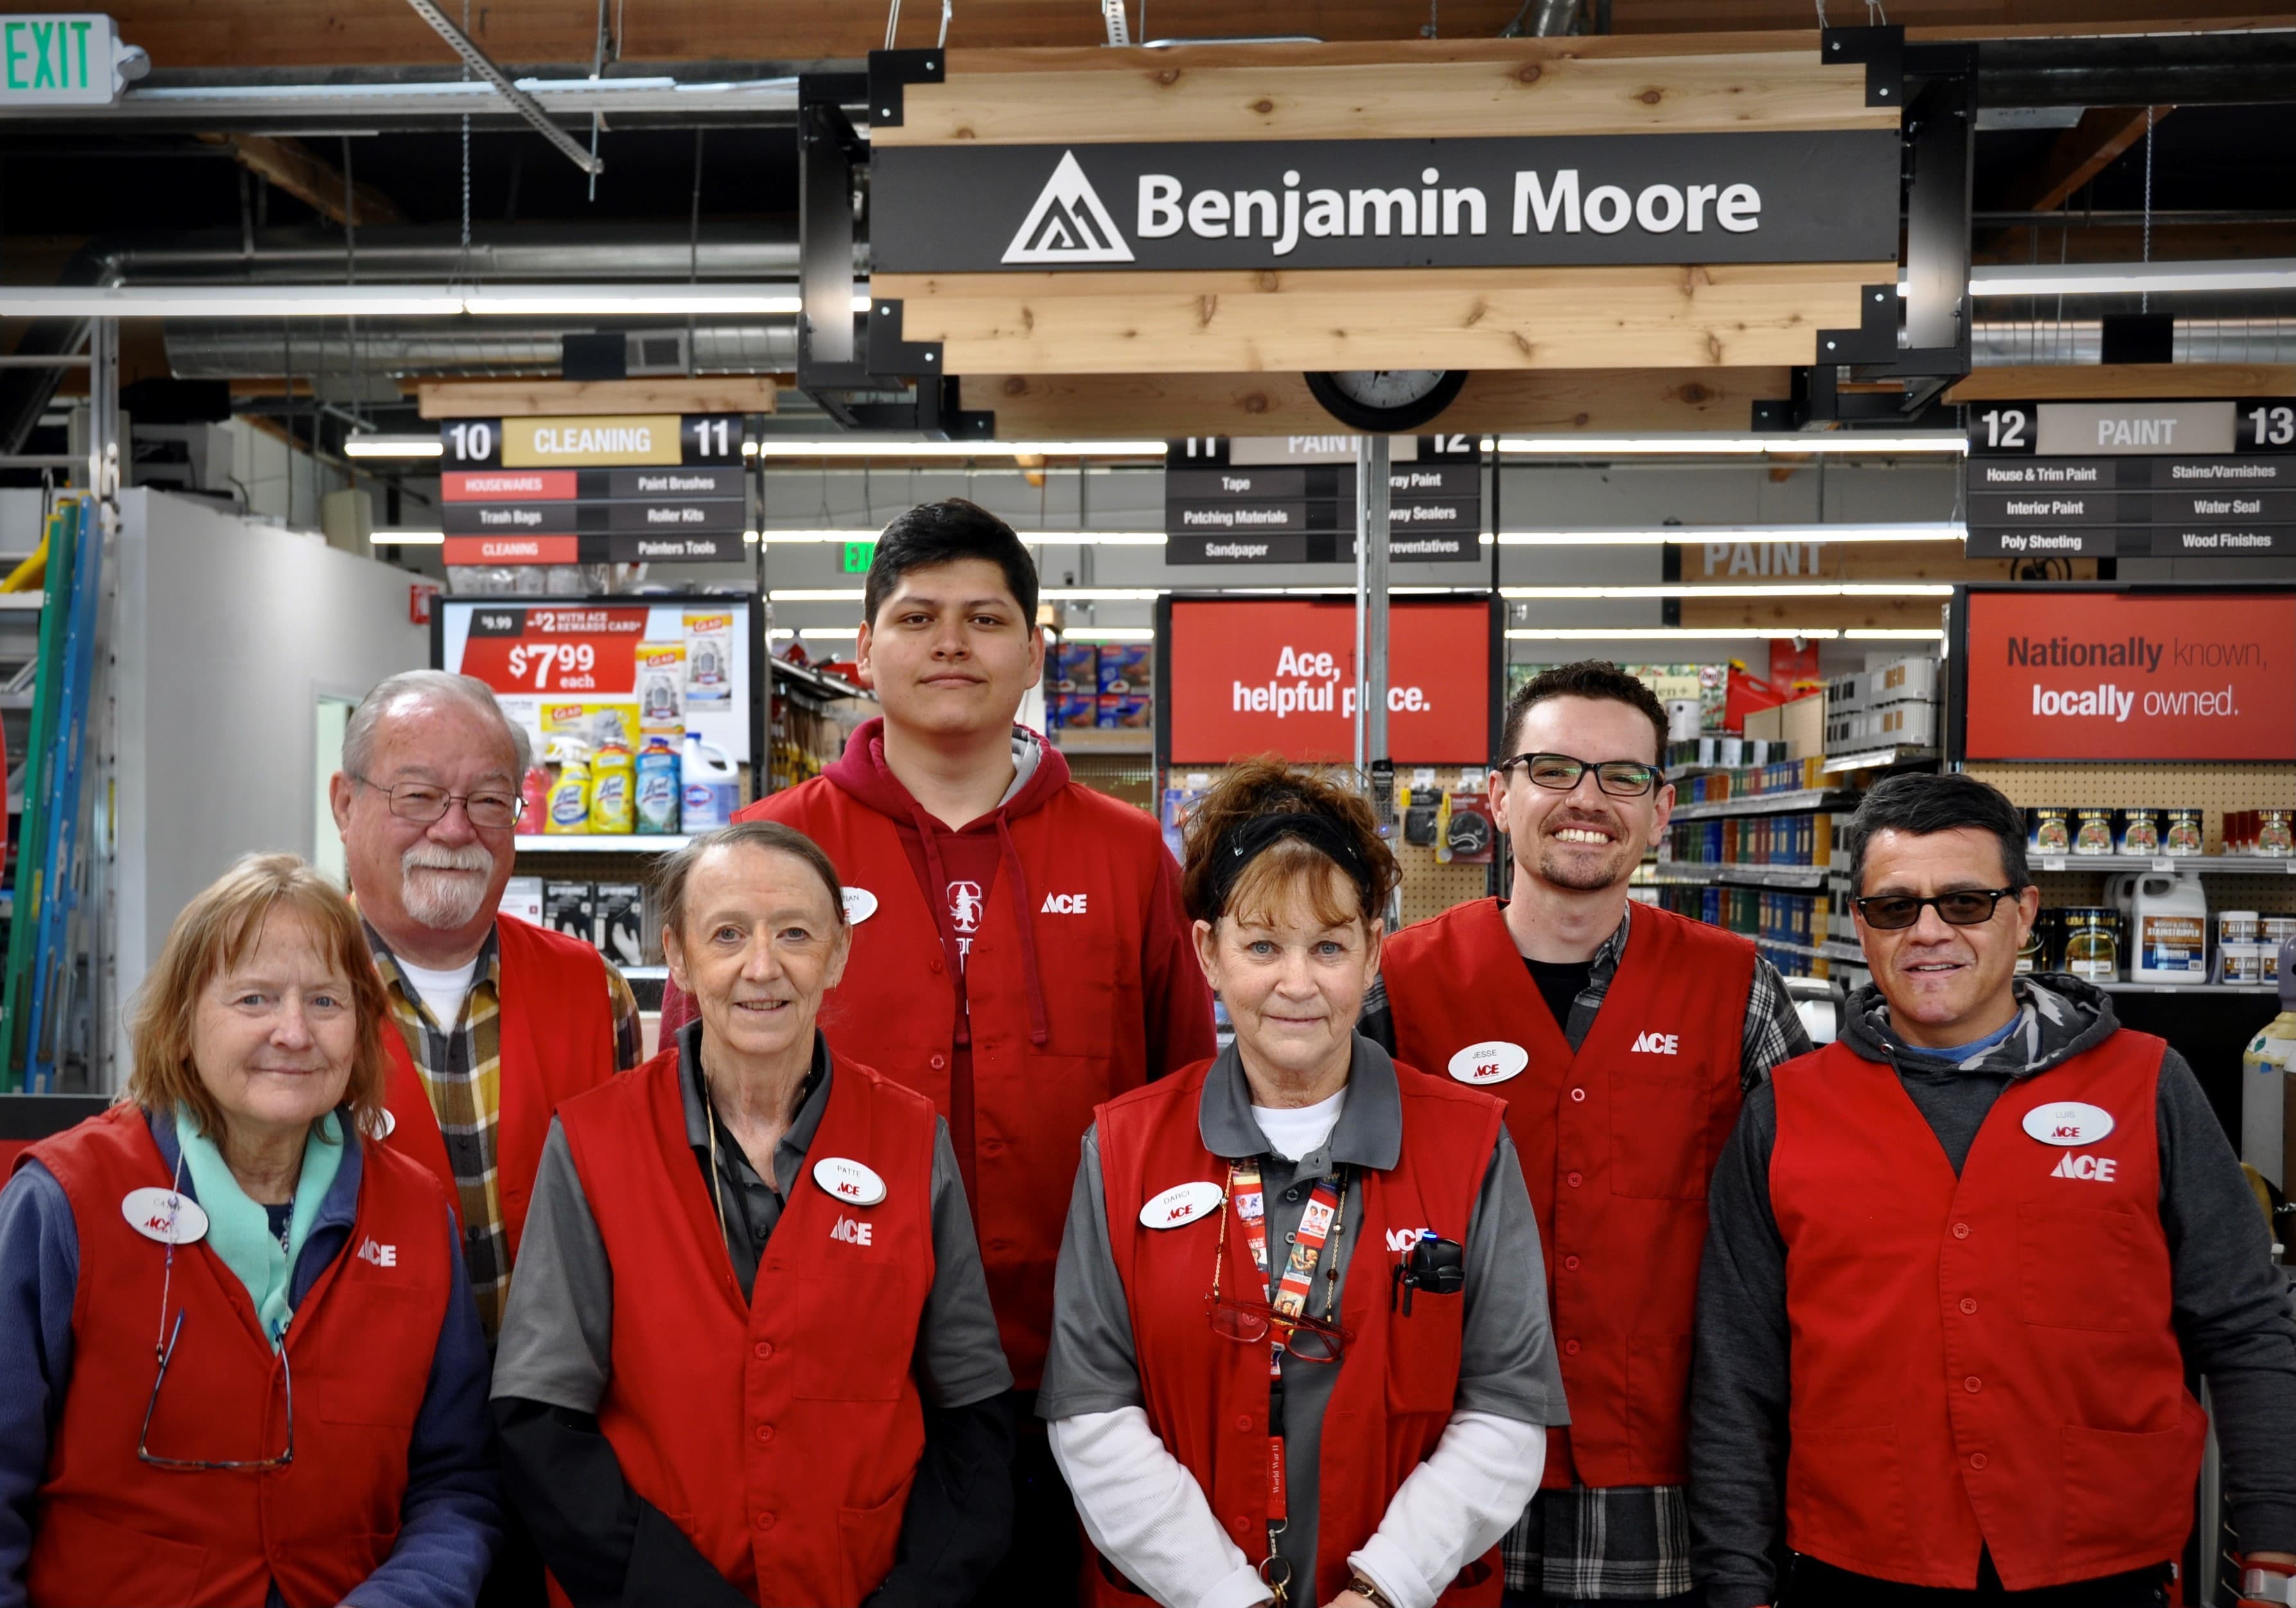 Group photo of the employees at Ace Hardware.